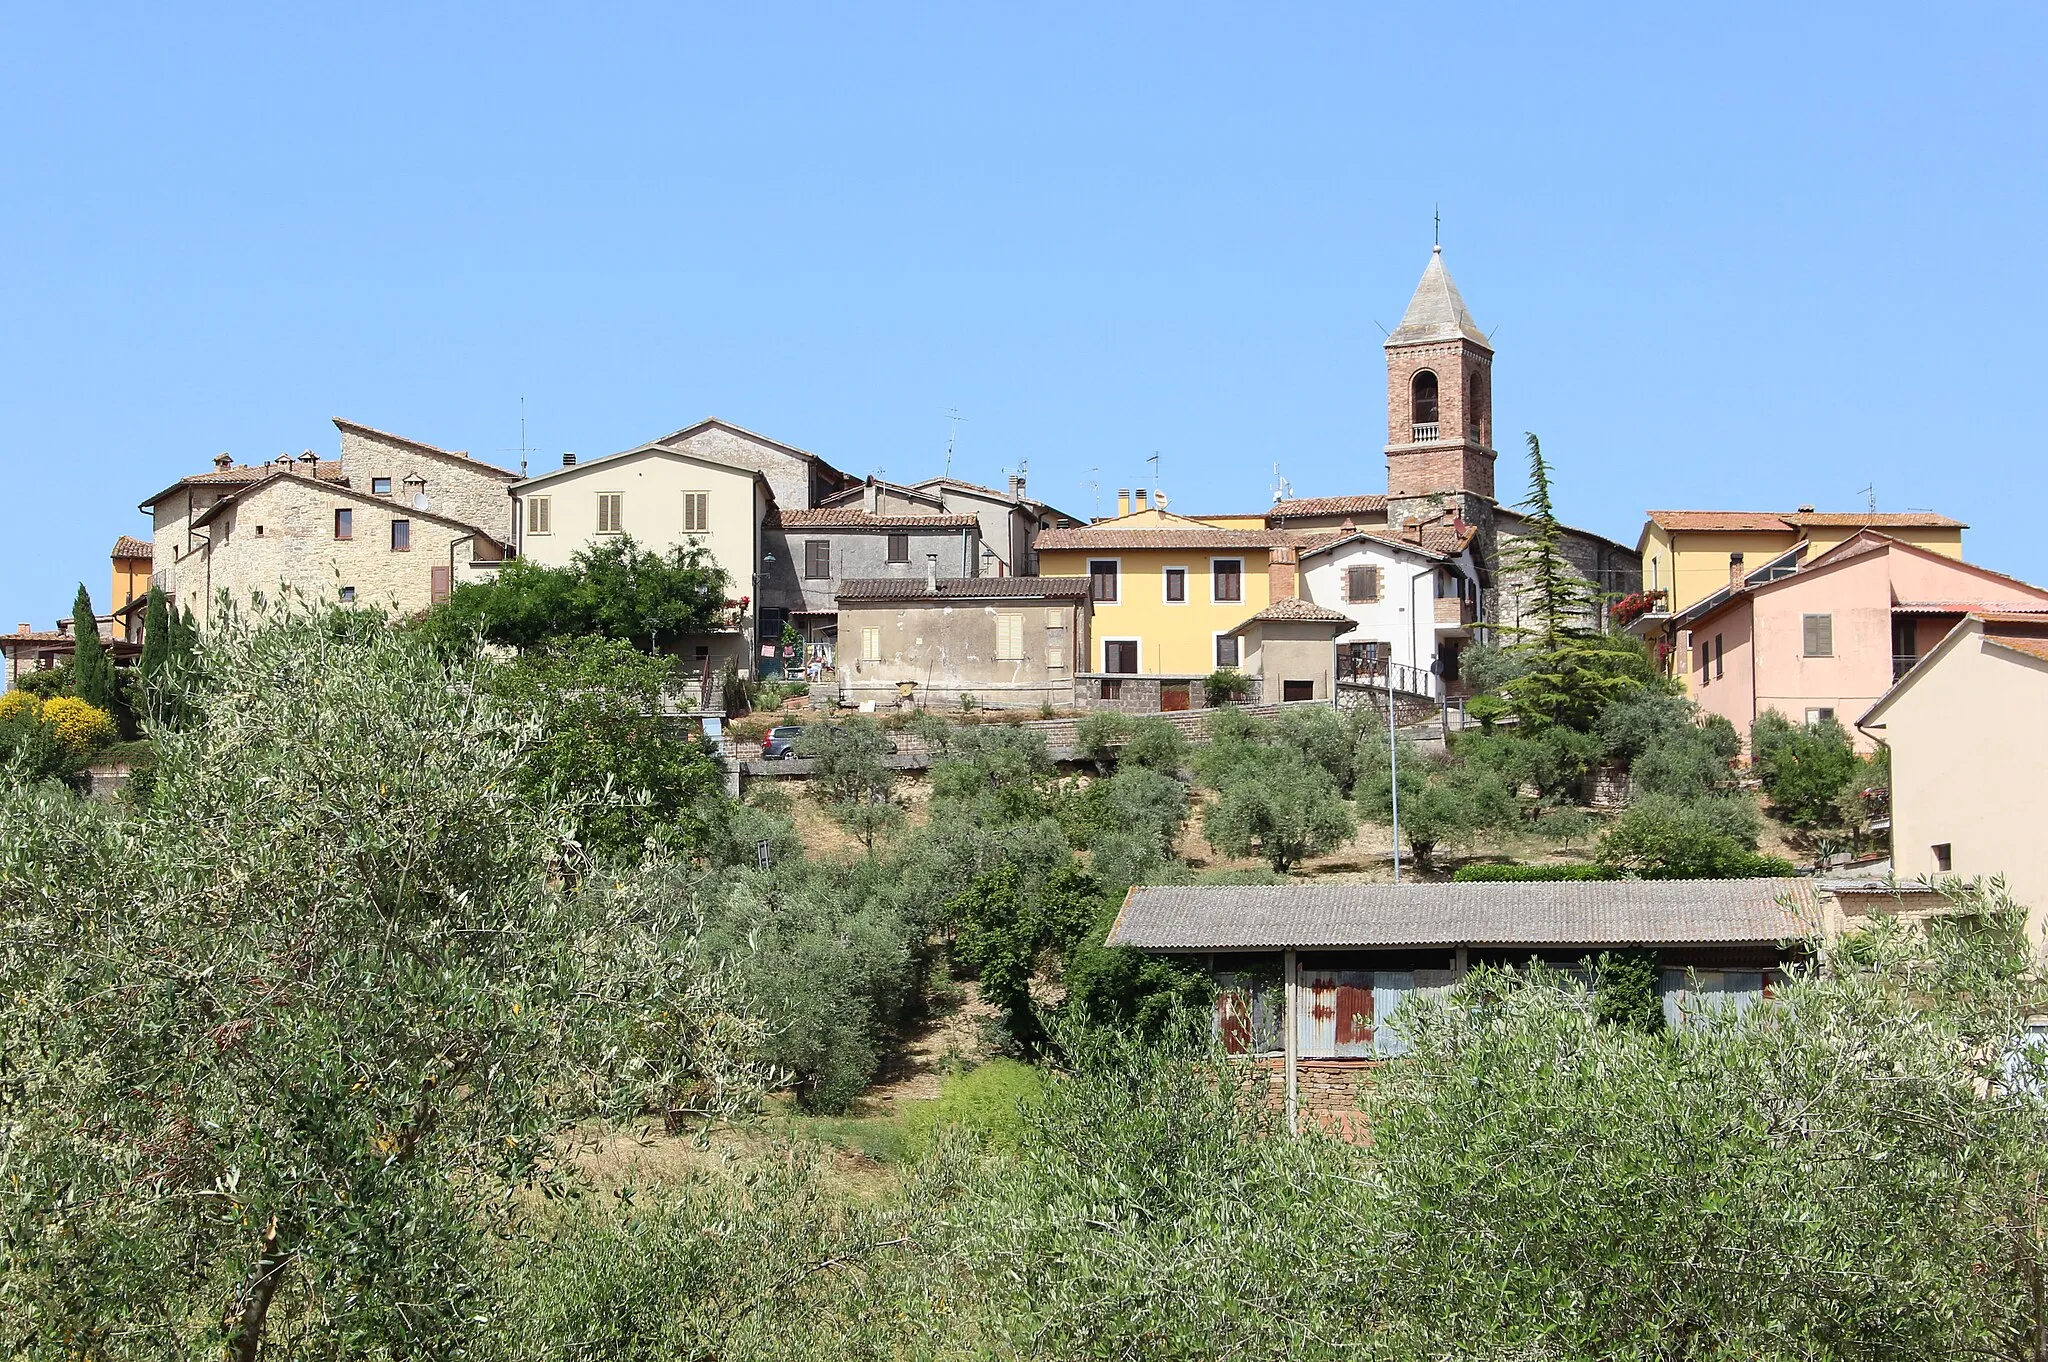 Photo showing: Colle Secco, hamlet of Montecastrilli, Province of Terni, Umbria, Italy